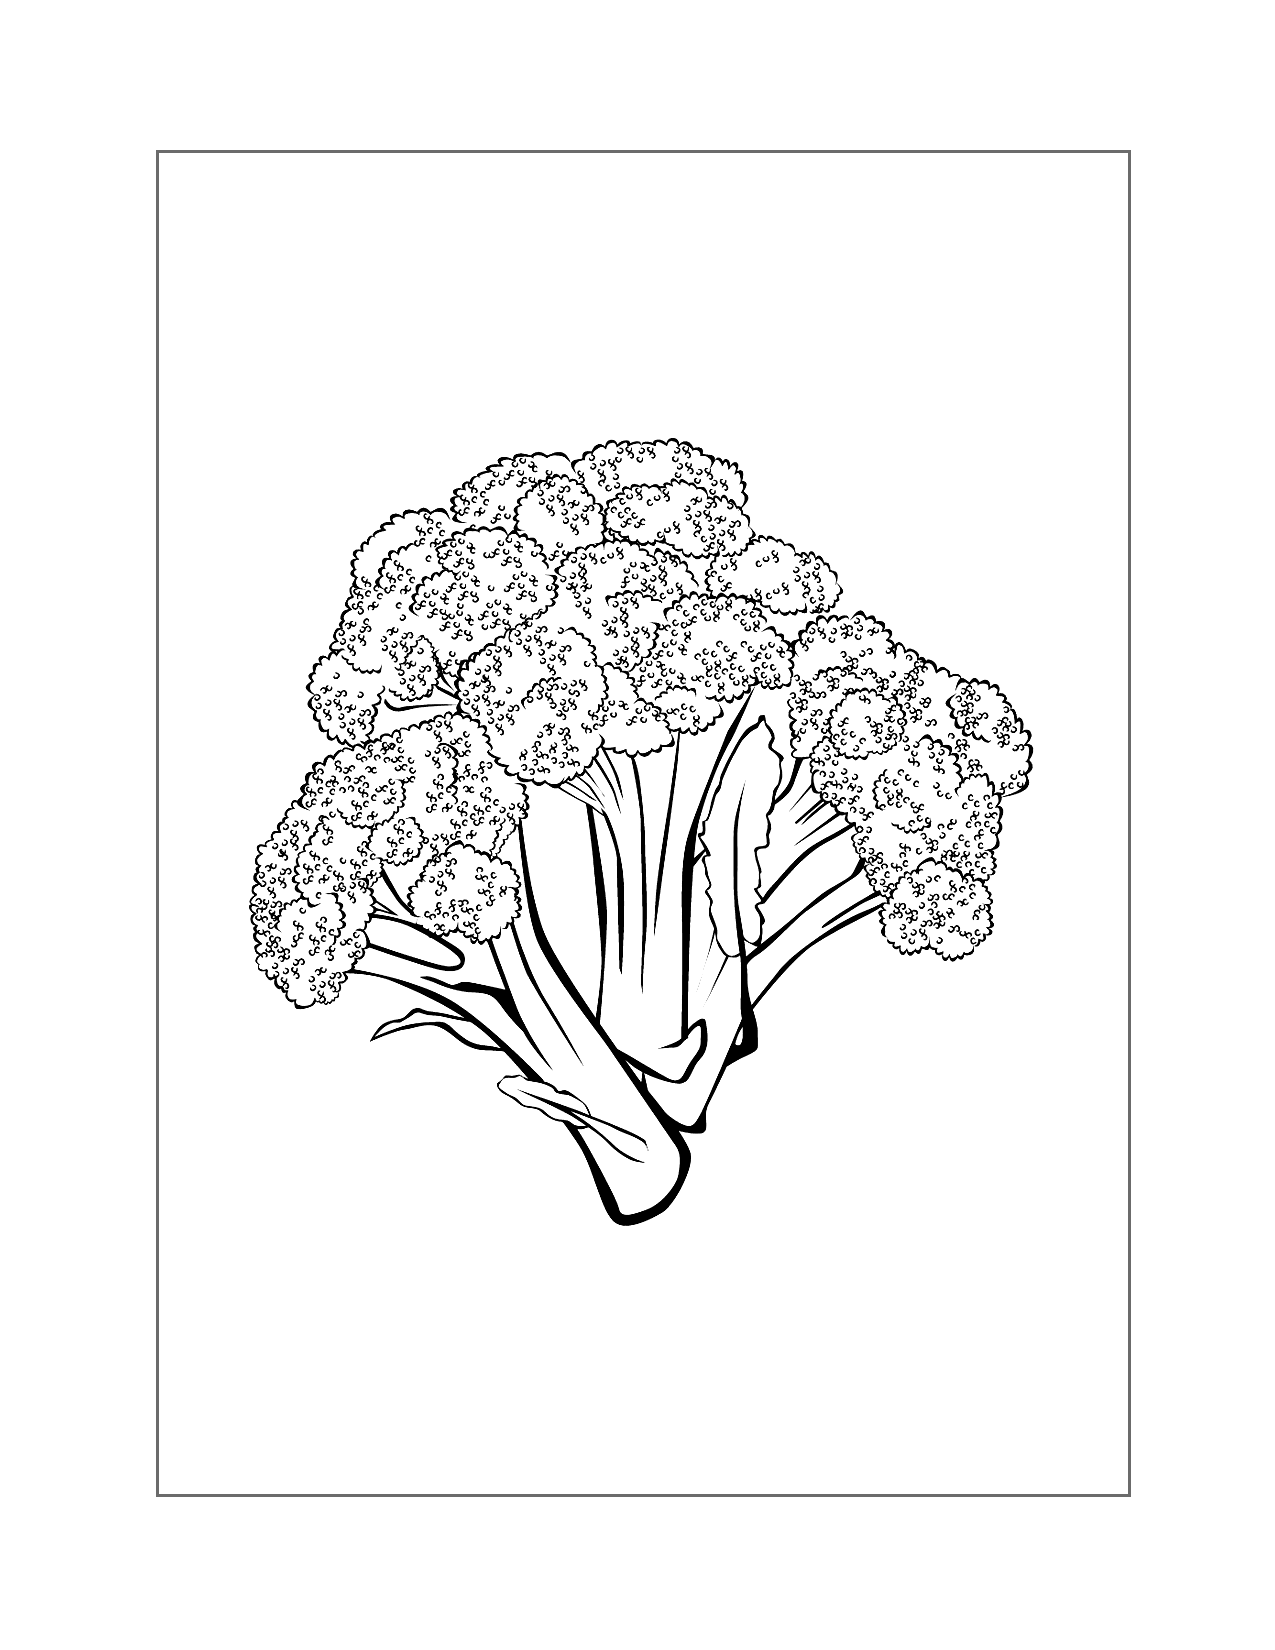 Broccoli Coloring Pages